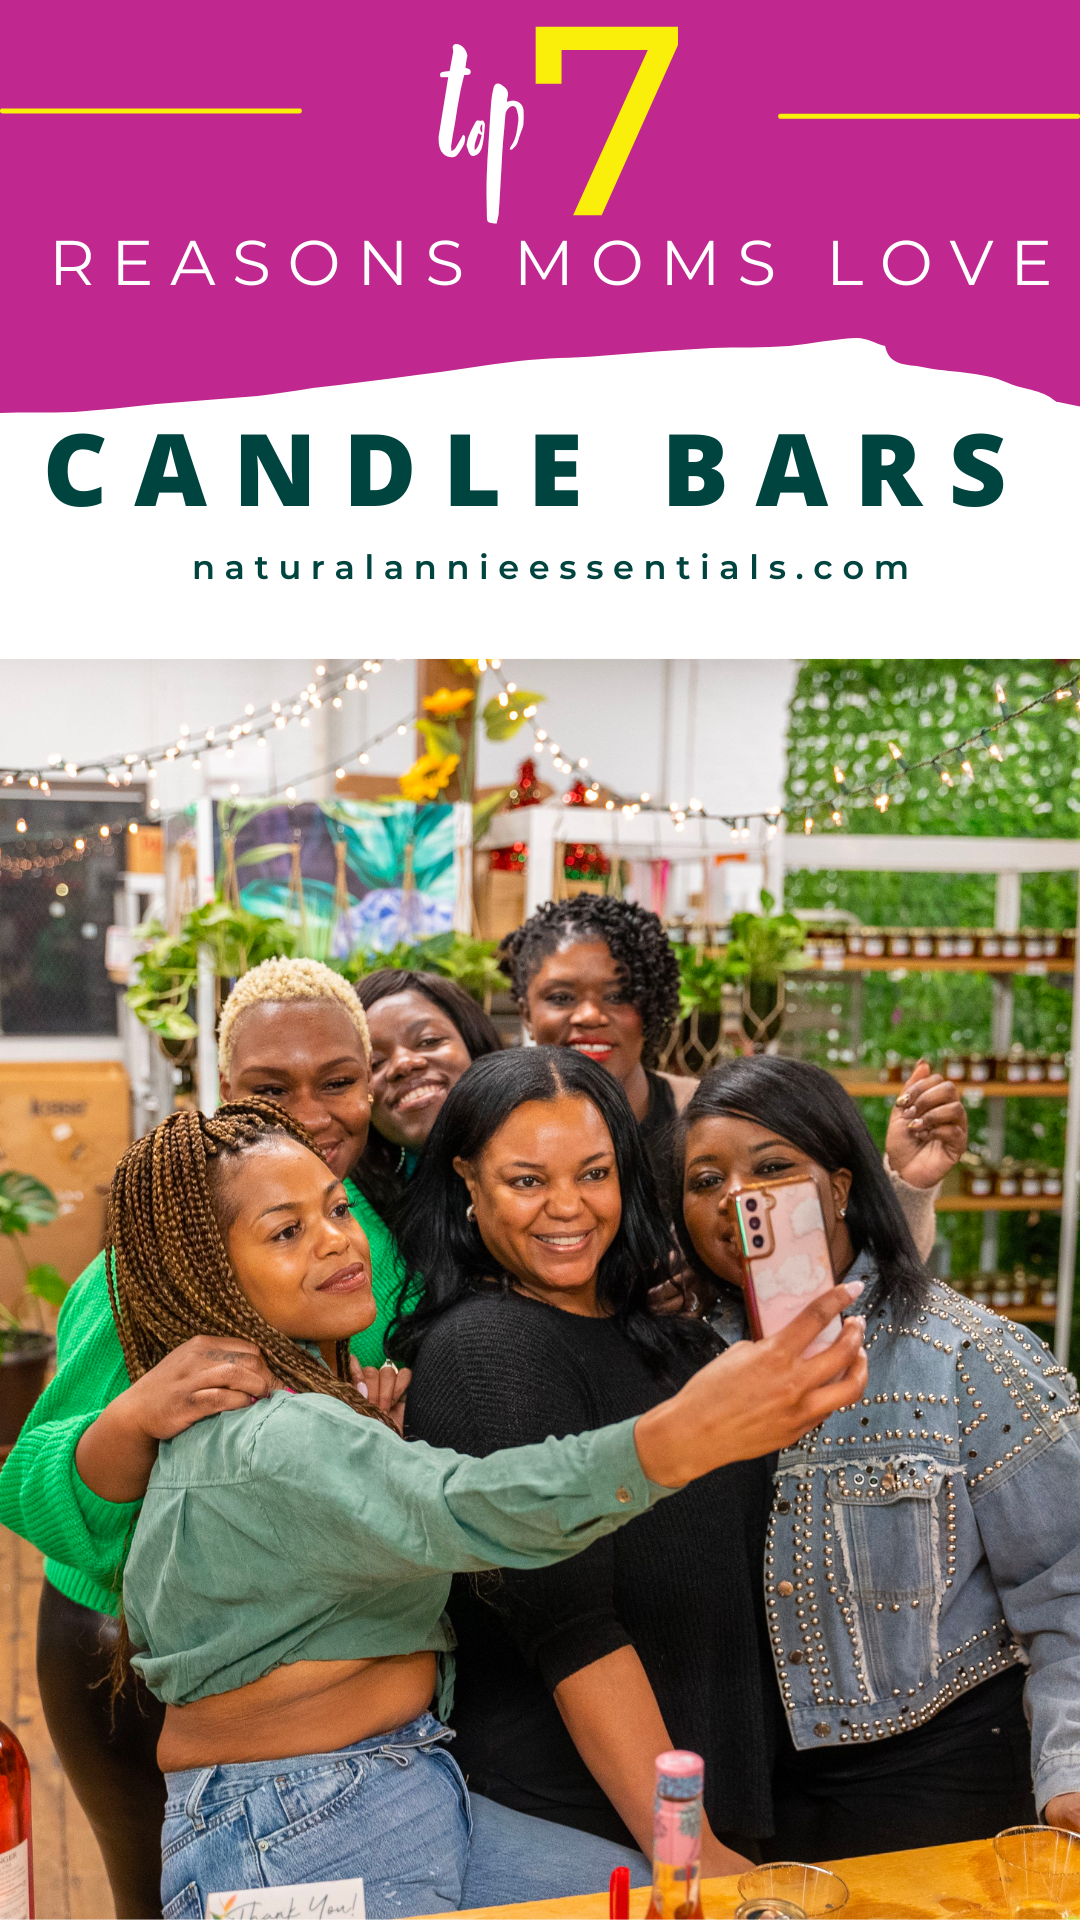 Top 7 Reasons Moms Love Candle Bars